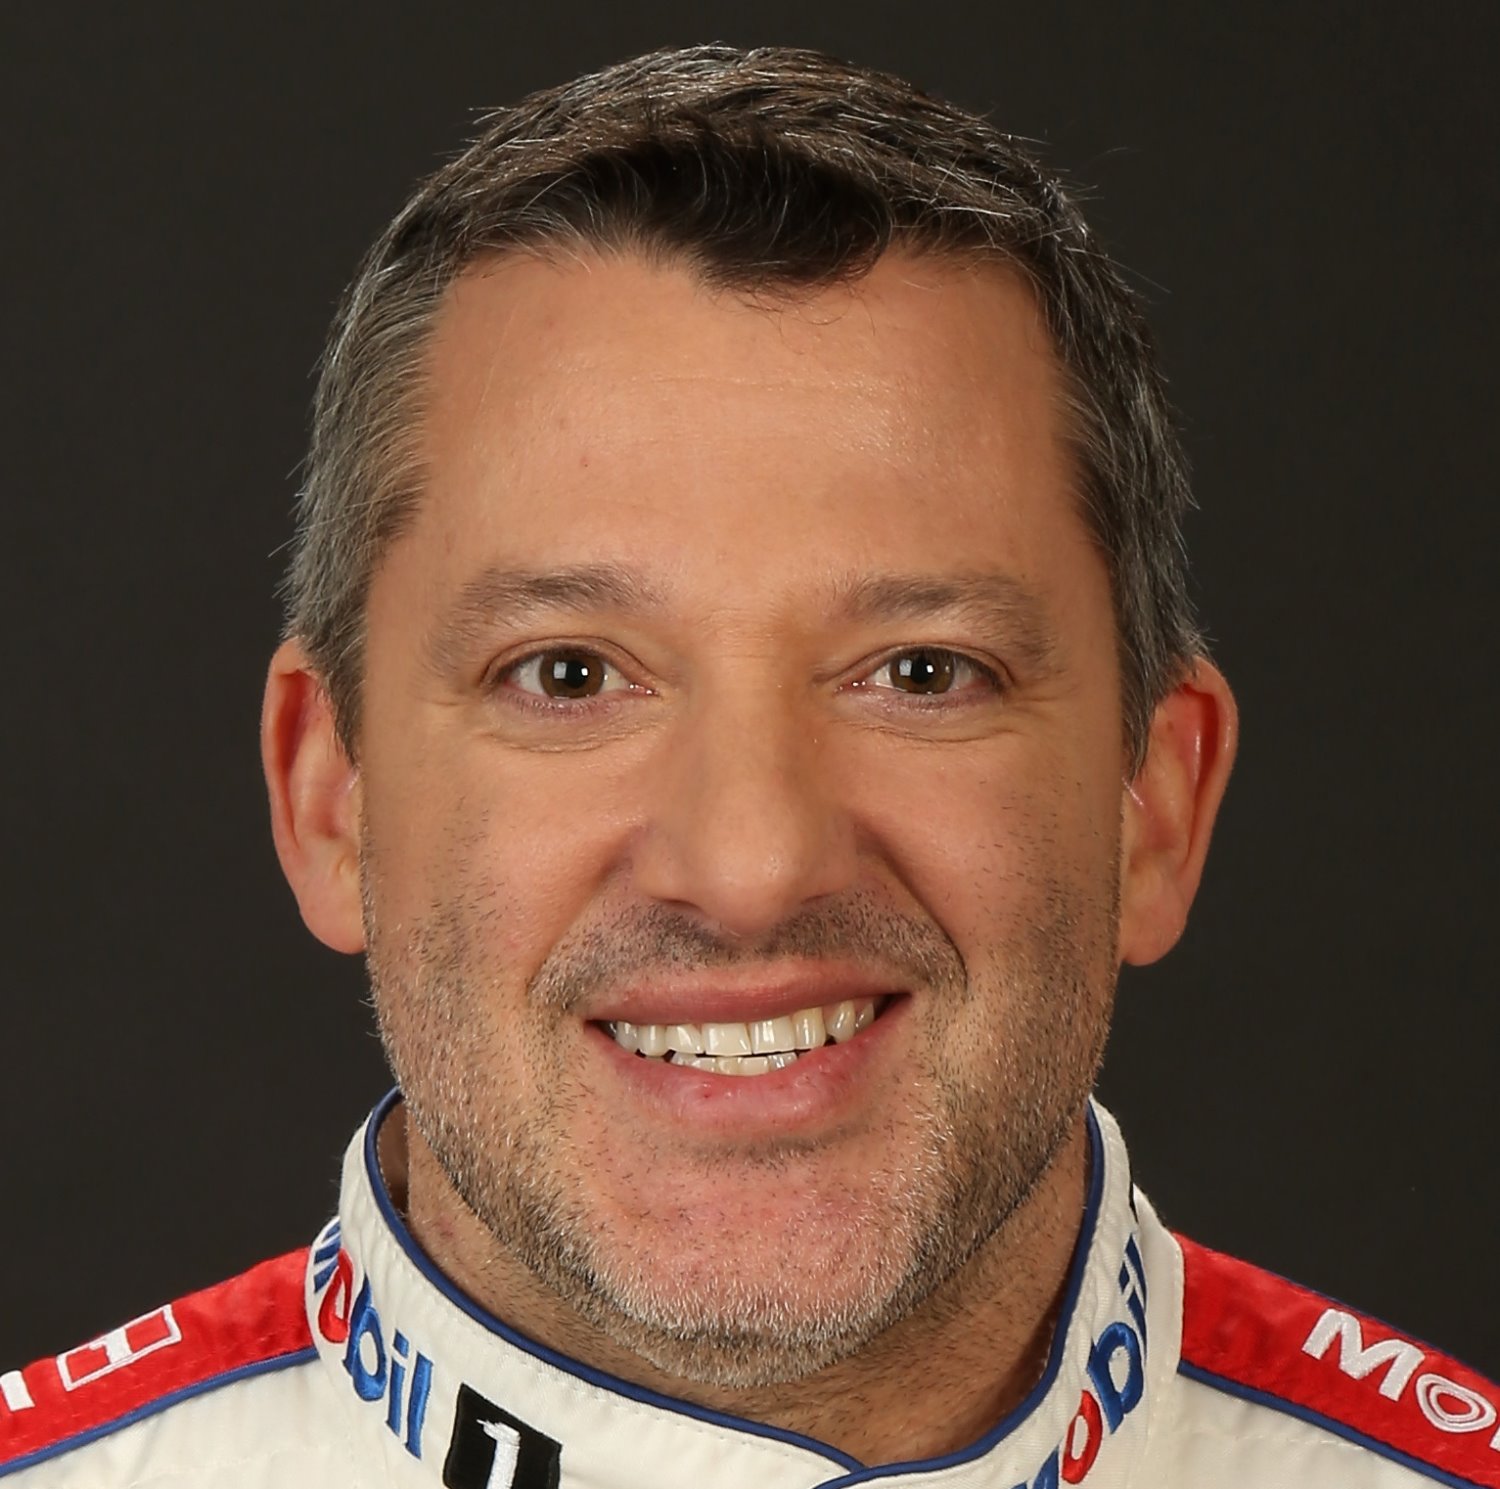 IMS will bend over backwards for Tony Stewart, who thumbed his nose at IndyCar and went to NASCAR